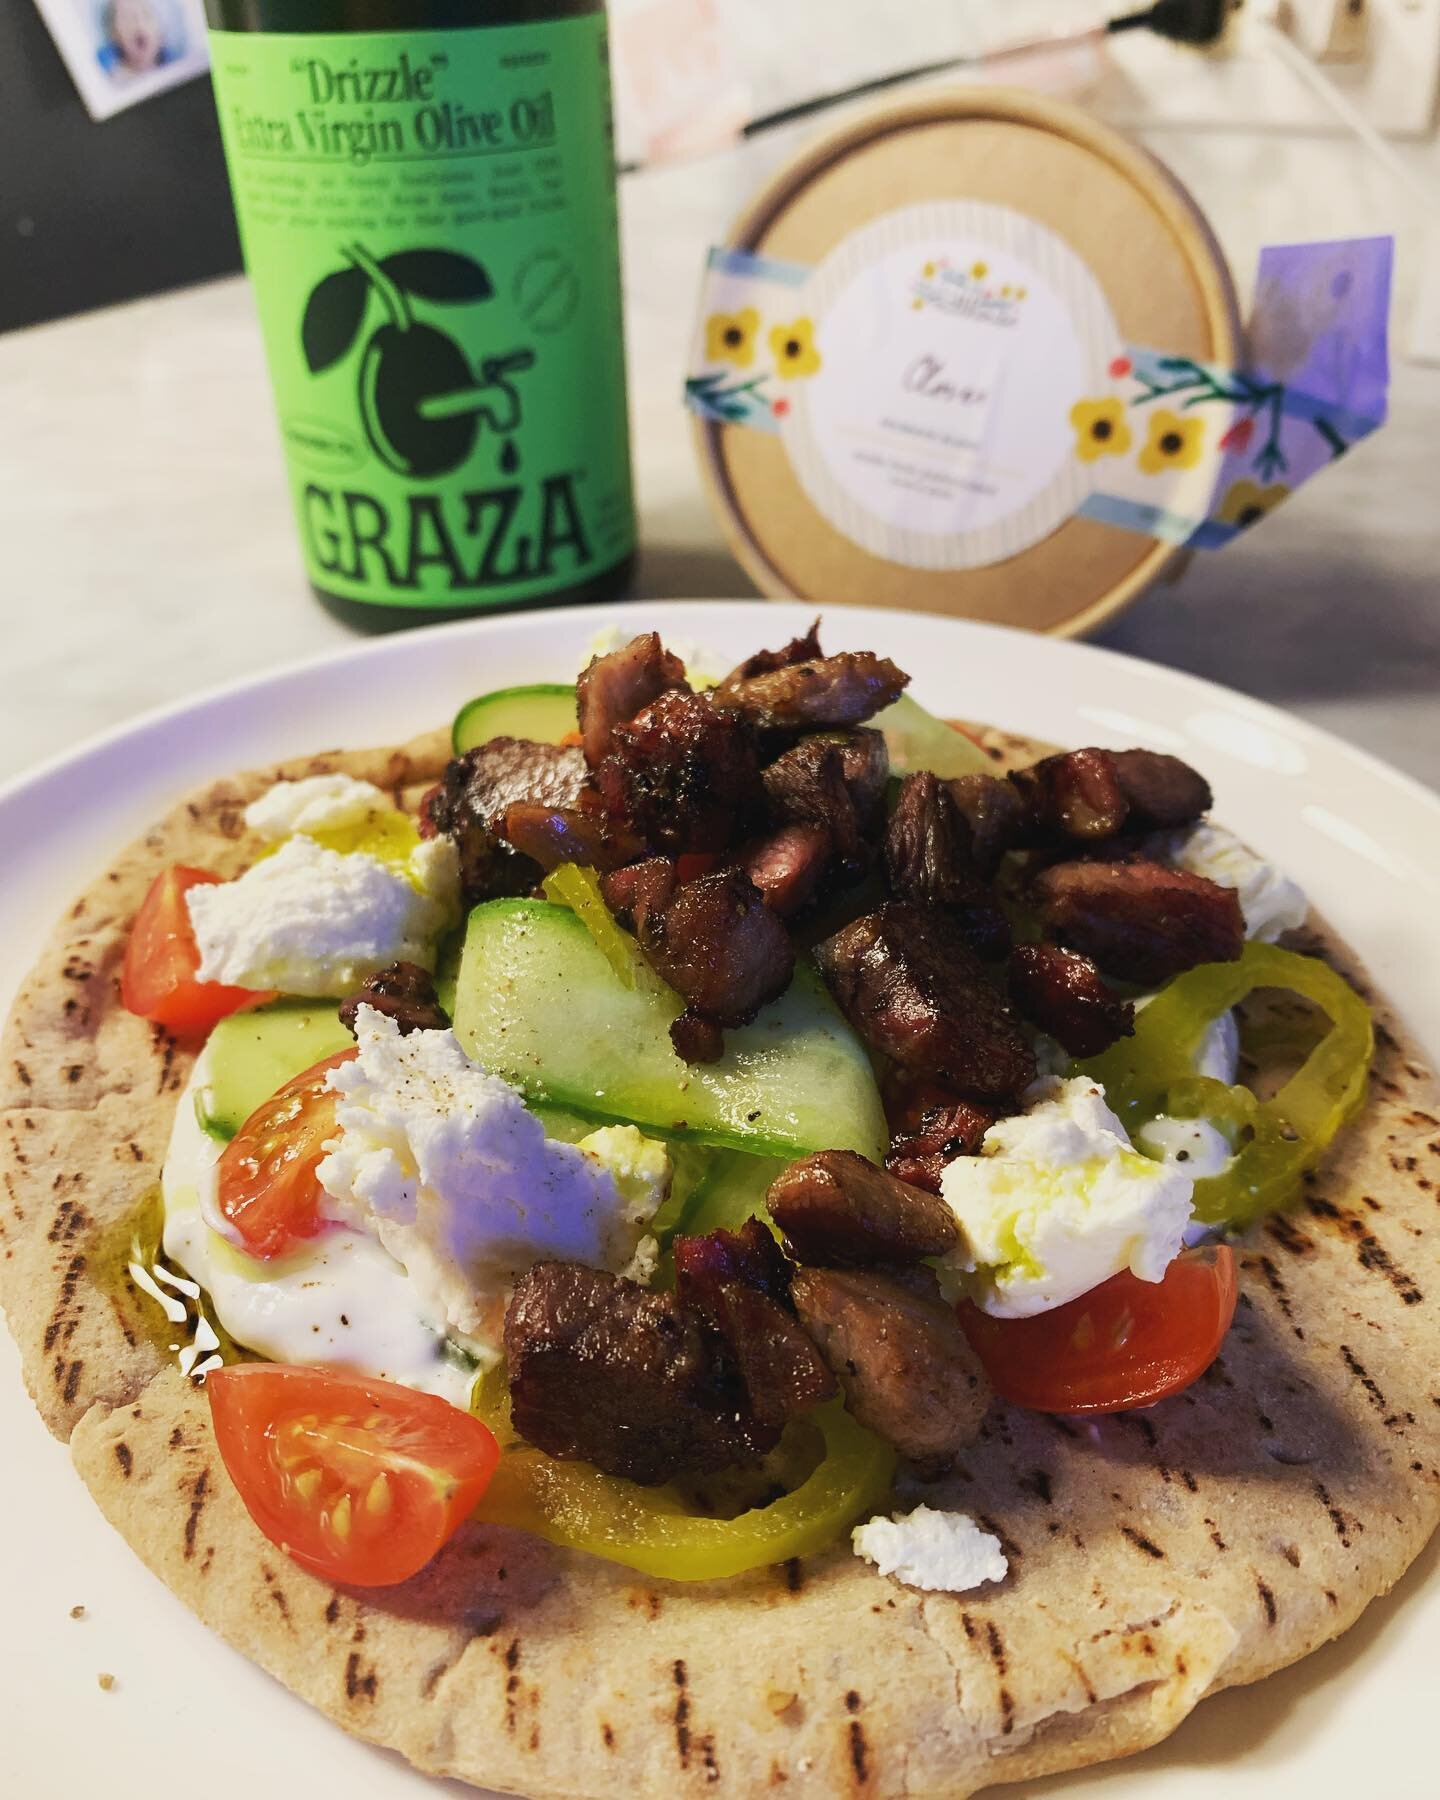 &ldquo;Leftover lamb&rdquo; pita made leftover night 👌 

Smoked rosemary lamb ends, #pepperoncini #cucumber #cherrytomatoes #tzatziki lots of salt, peppper, and rosemary. Finished with dollops of @milkhousecheese #fromageblanc and @getgraza finishin